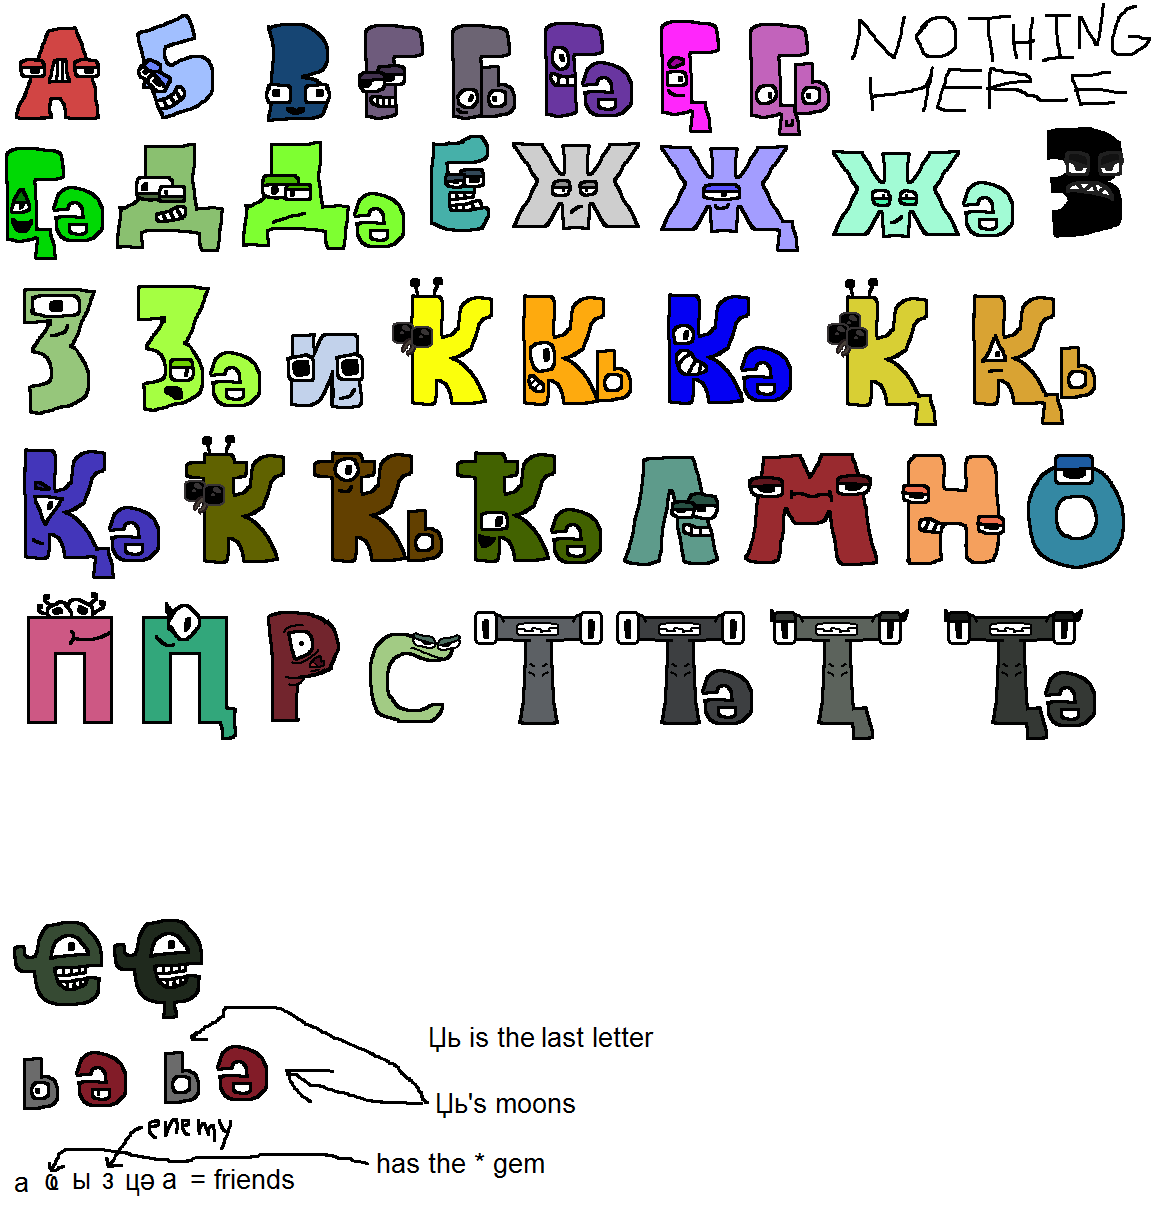 Alphabet Lore - All Letters (A-Z) by g4merxethan on DeviantArt